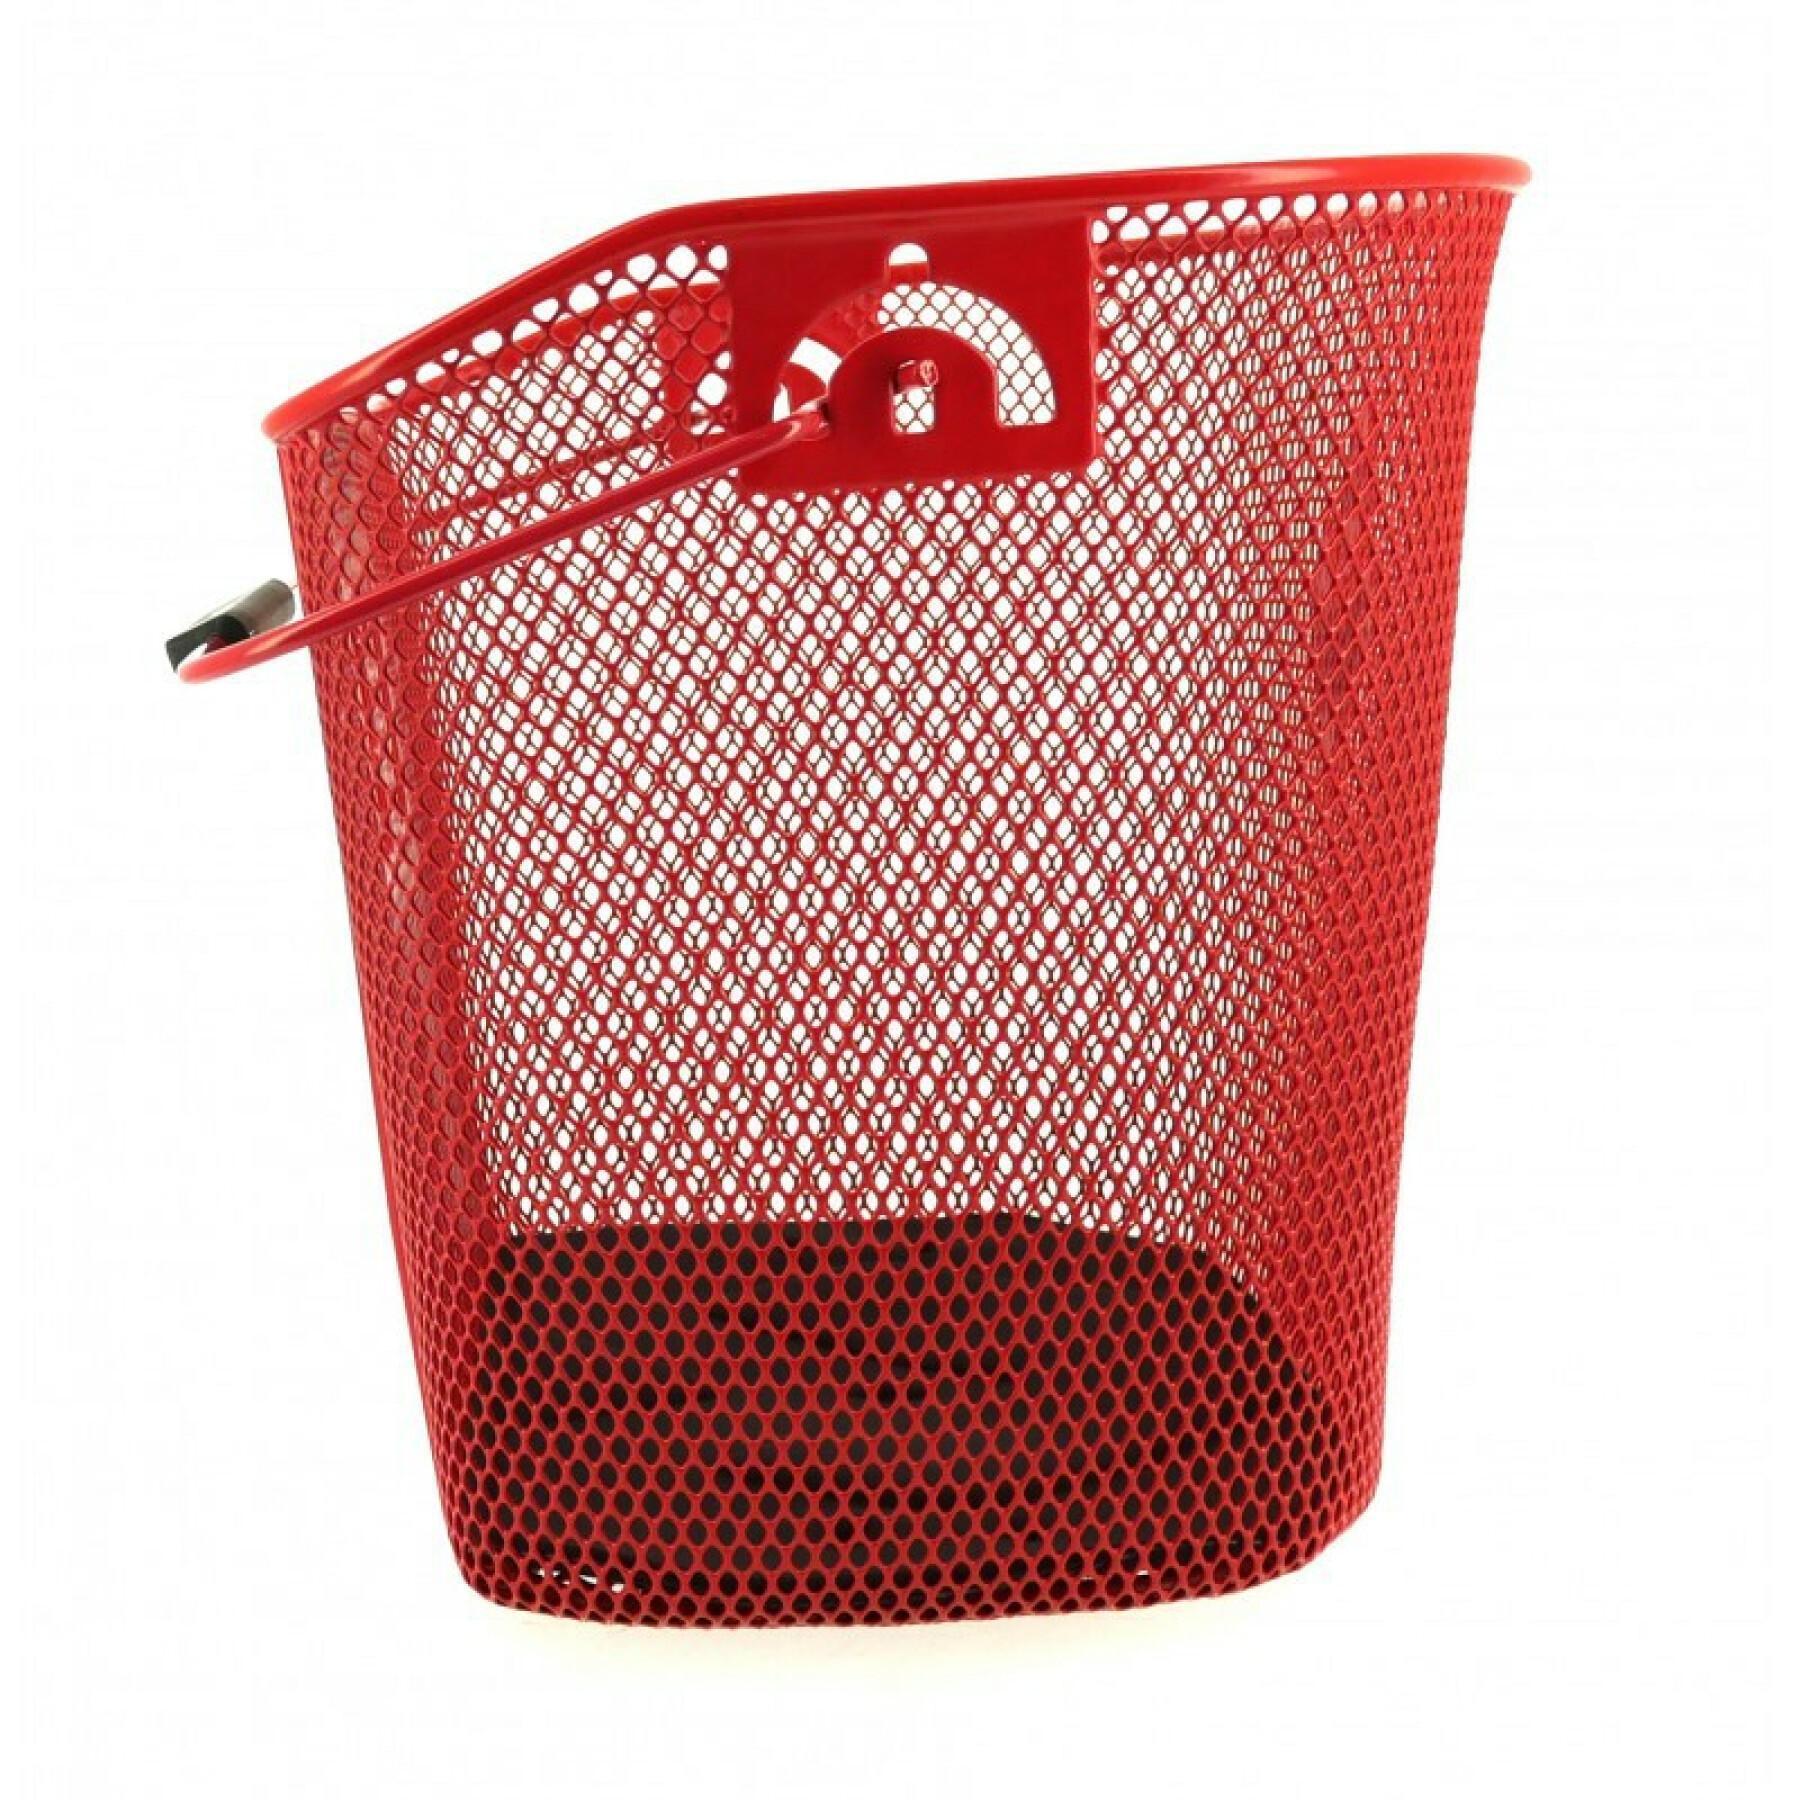 Steel basket xxl red with mts3 attachment Hapo-G